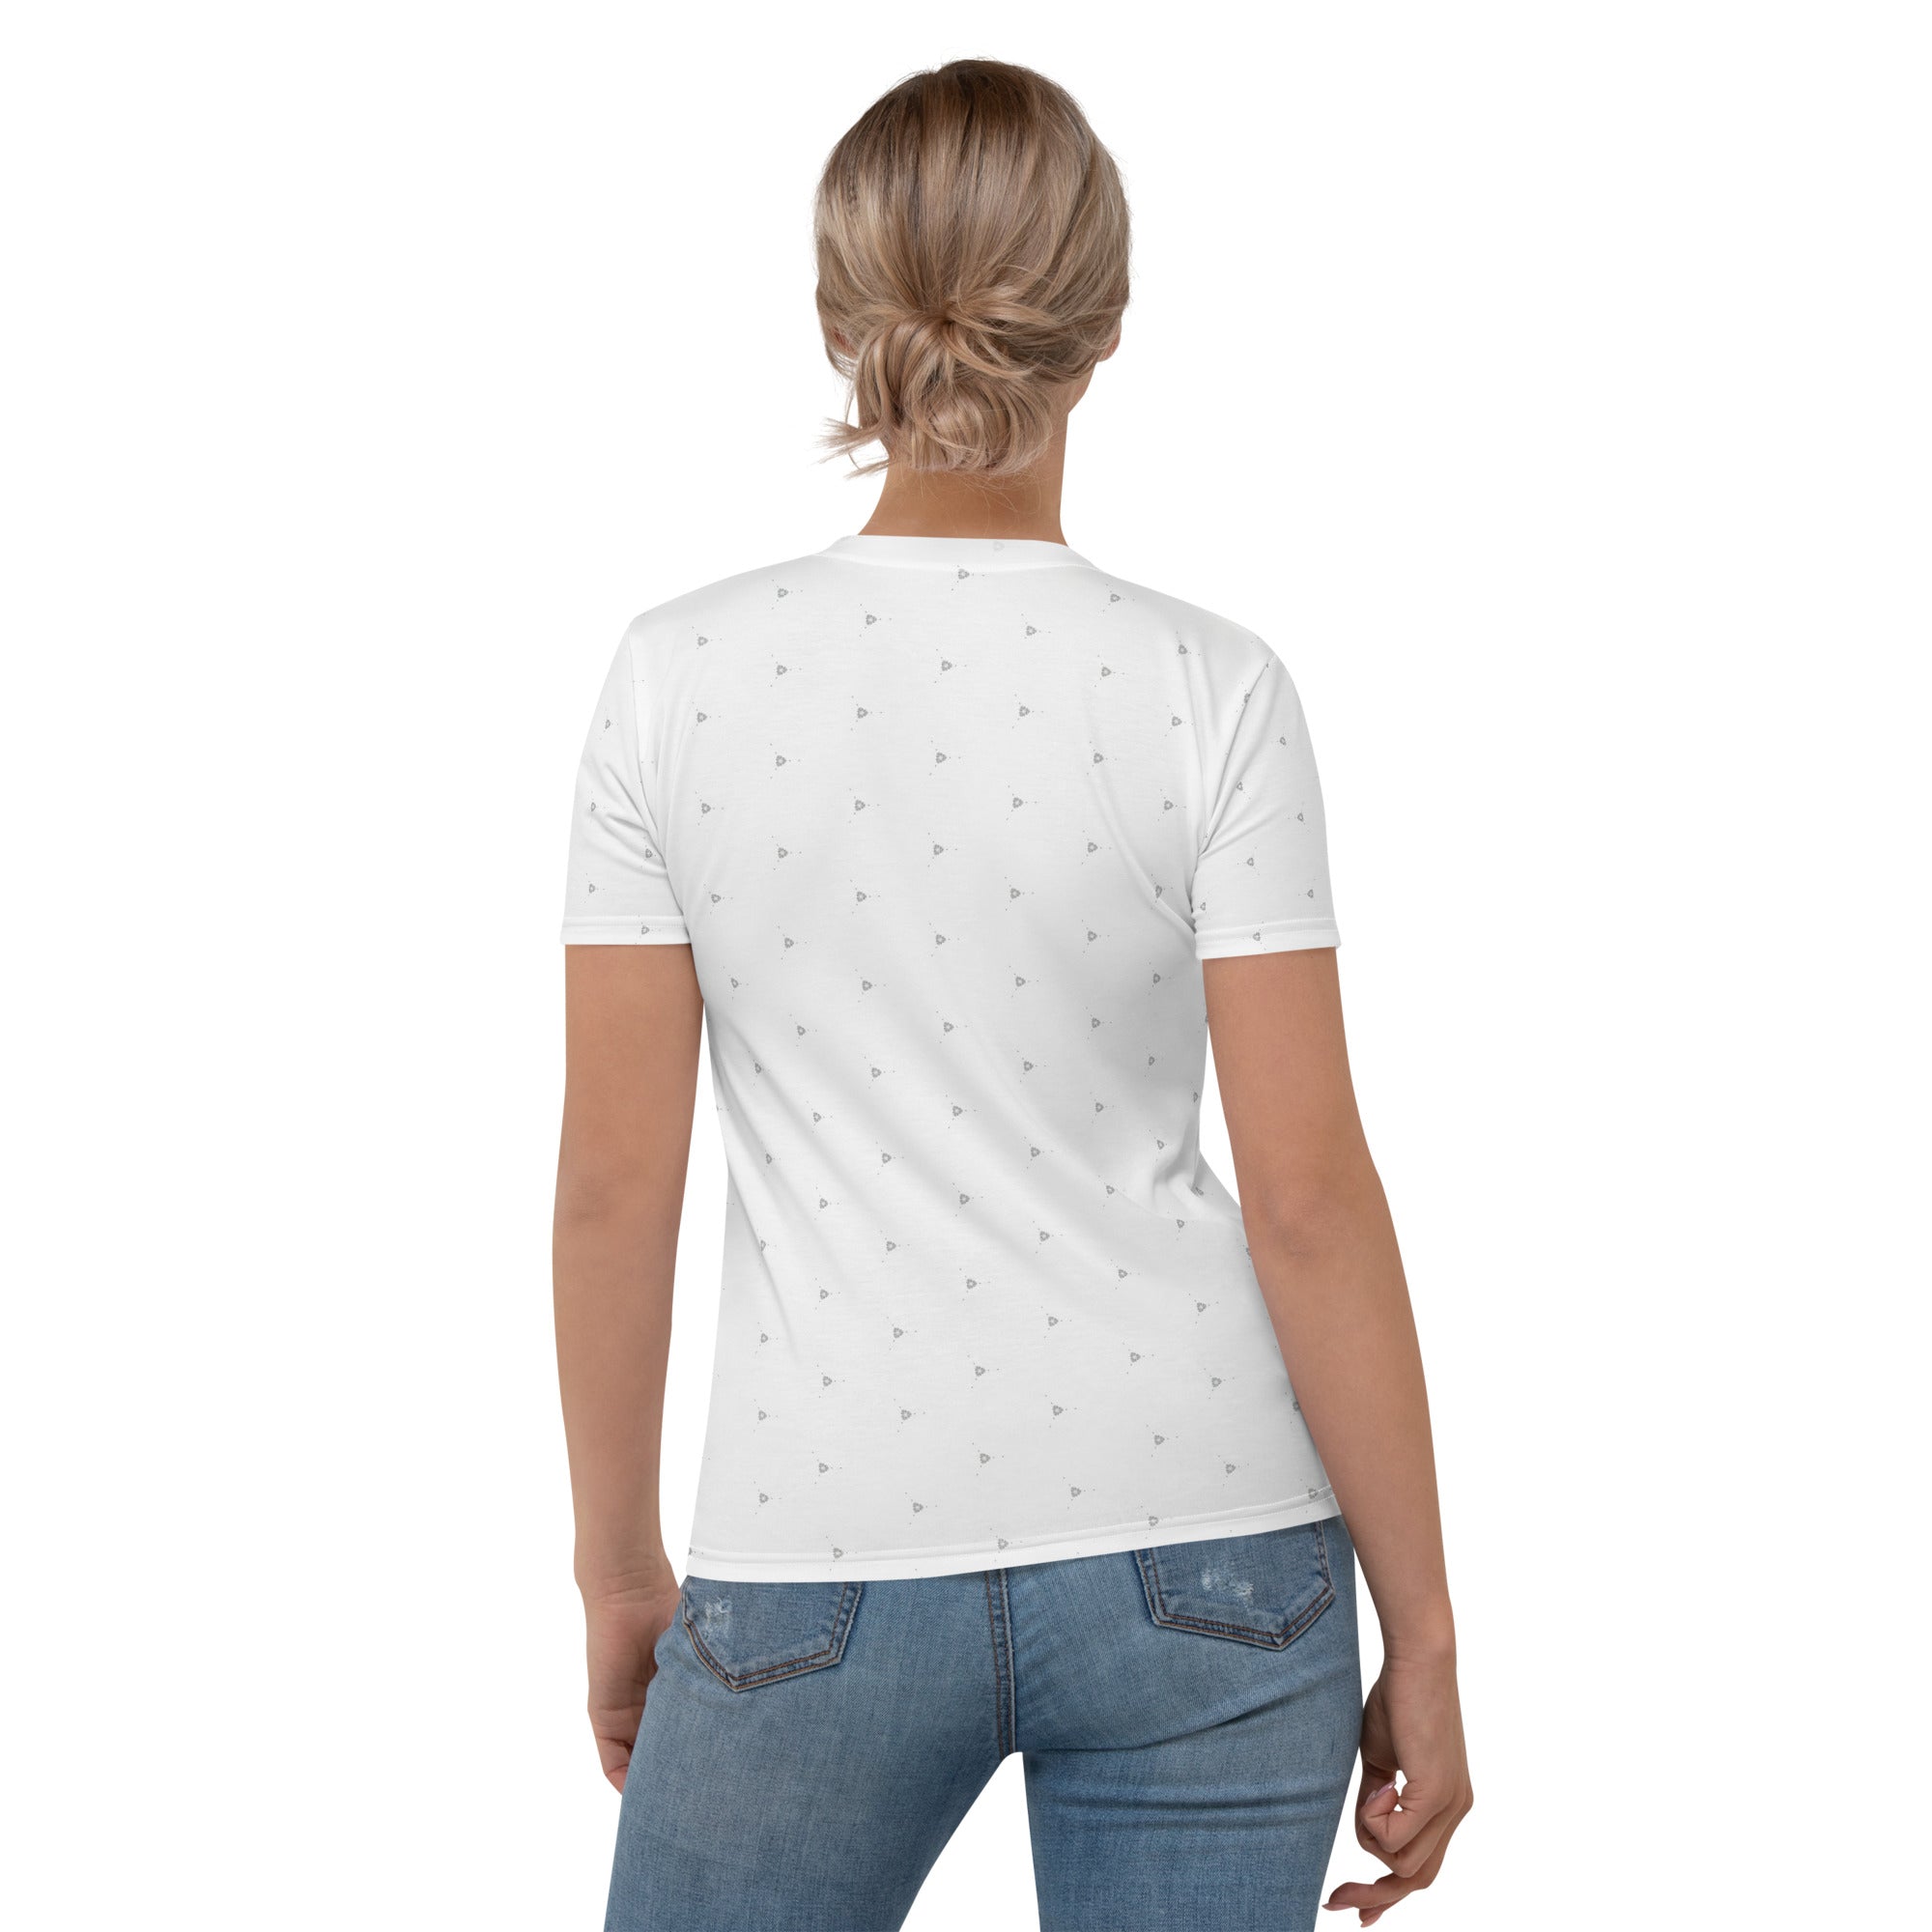 Nature-inspired Wispy Willow Whispers T-Shirt for women.